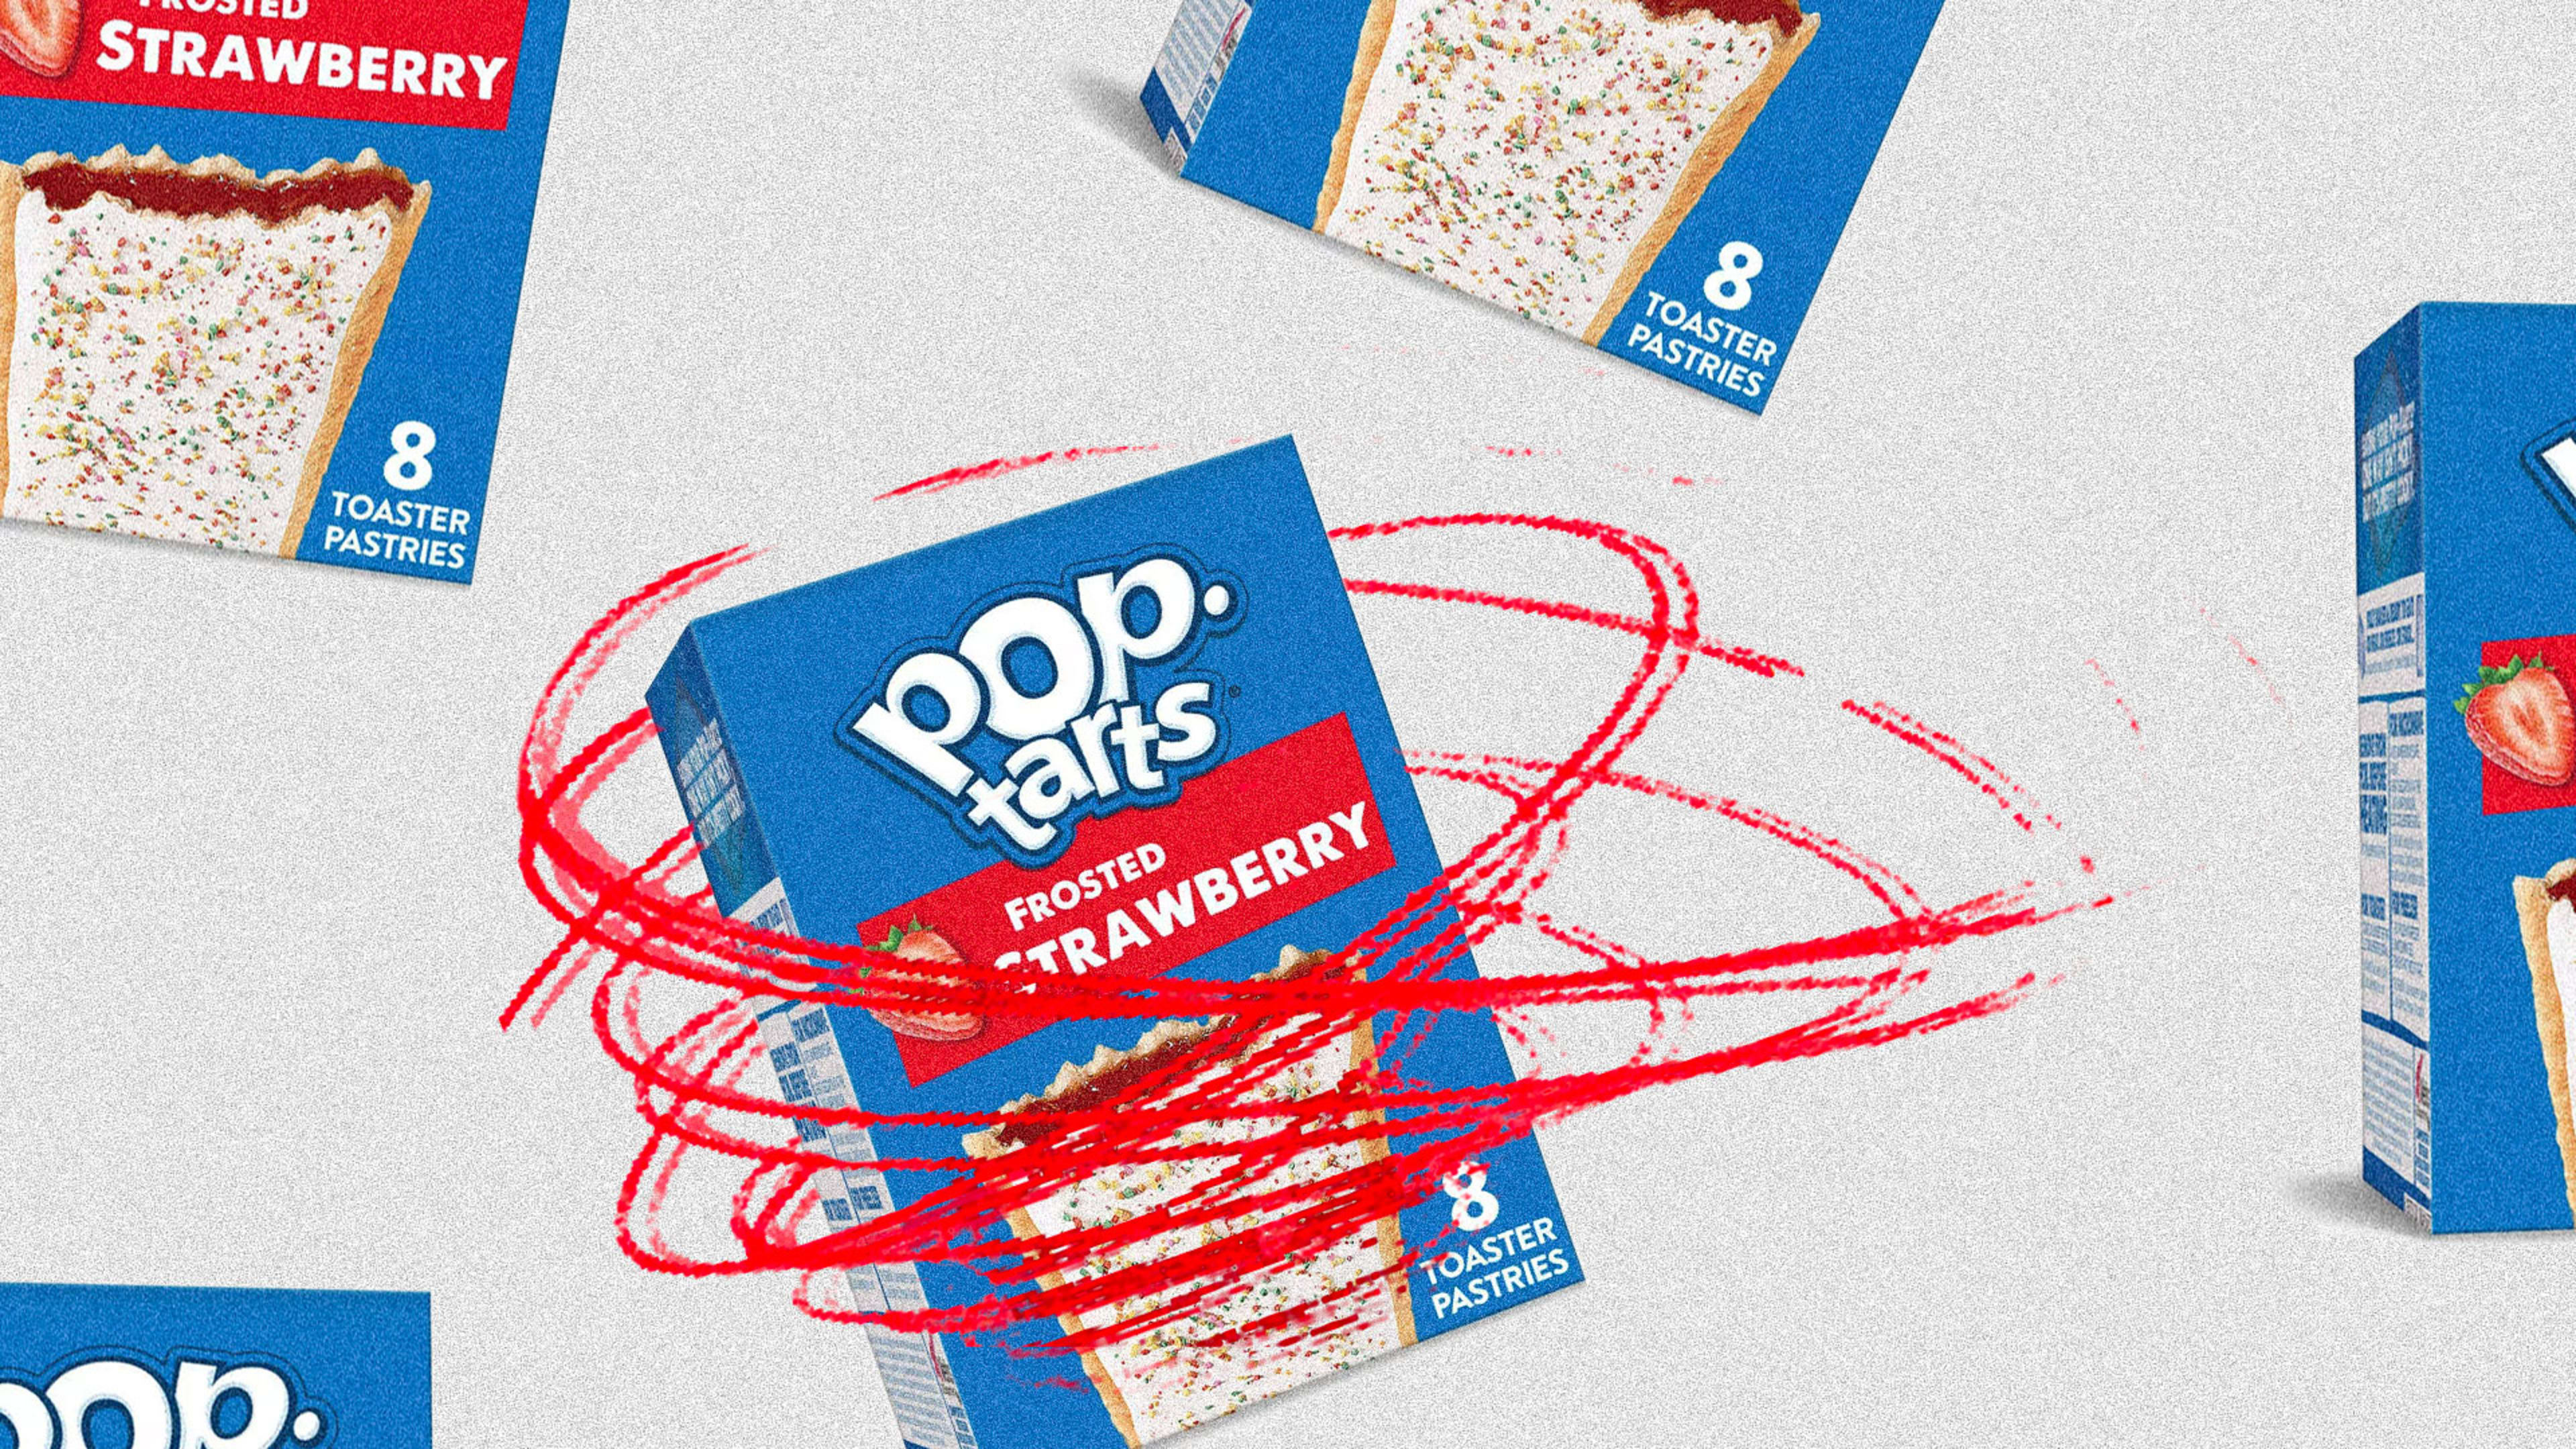 The strawberry Pop-Tarts lawsuit is no joke: Mislabeling by Big Food is a real problem